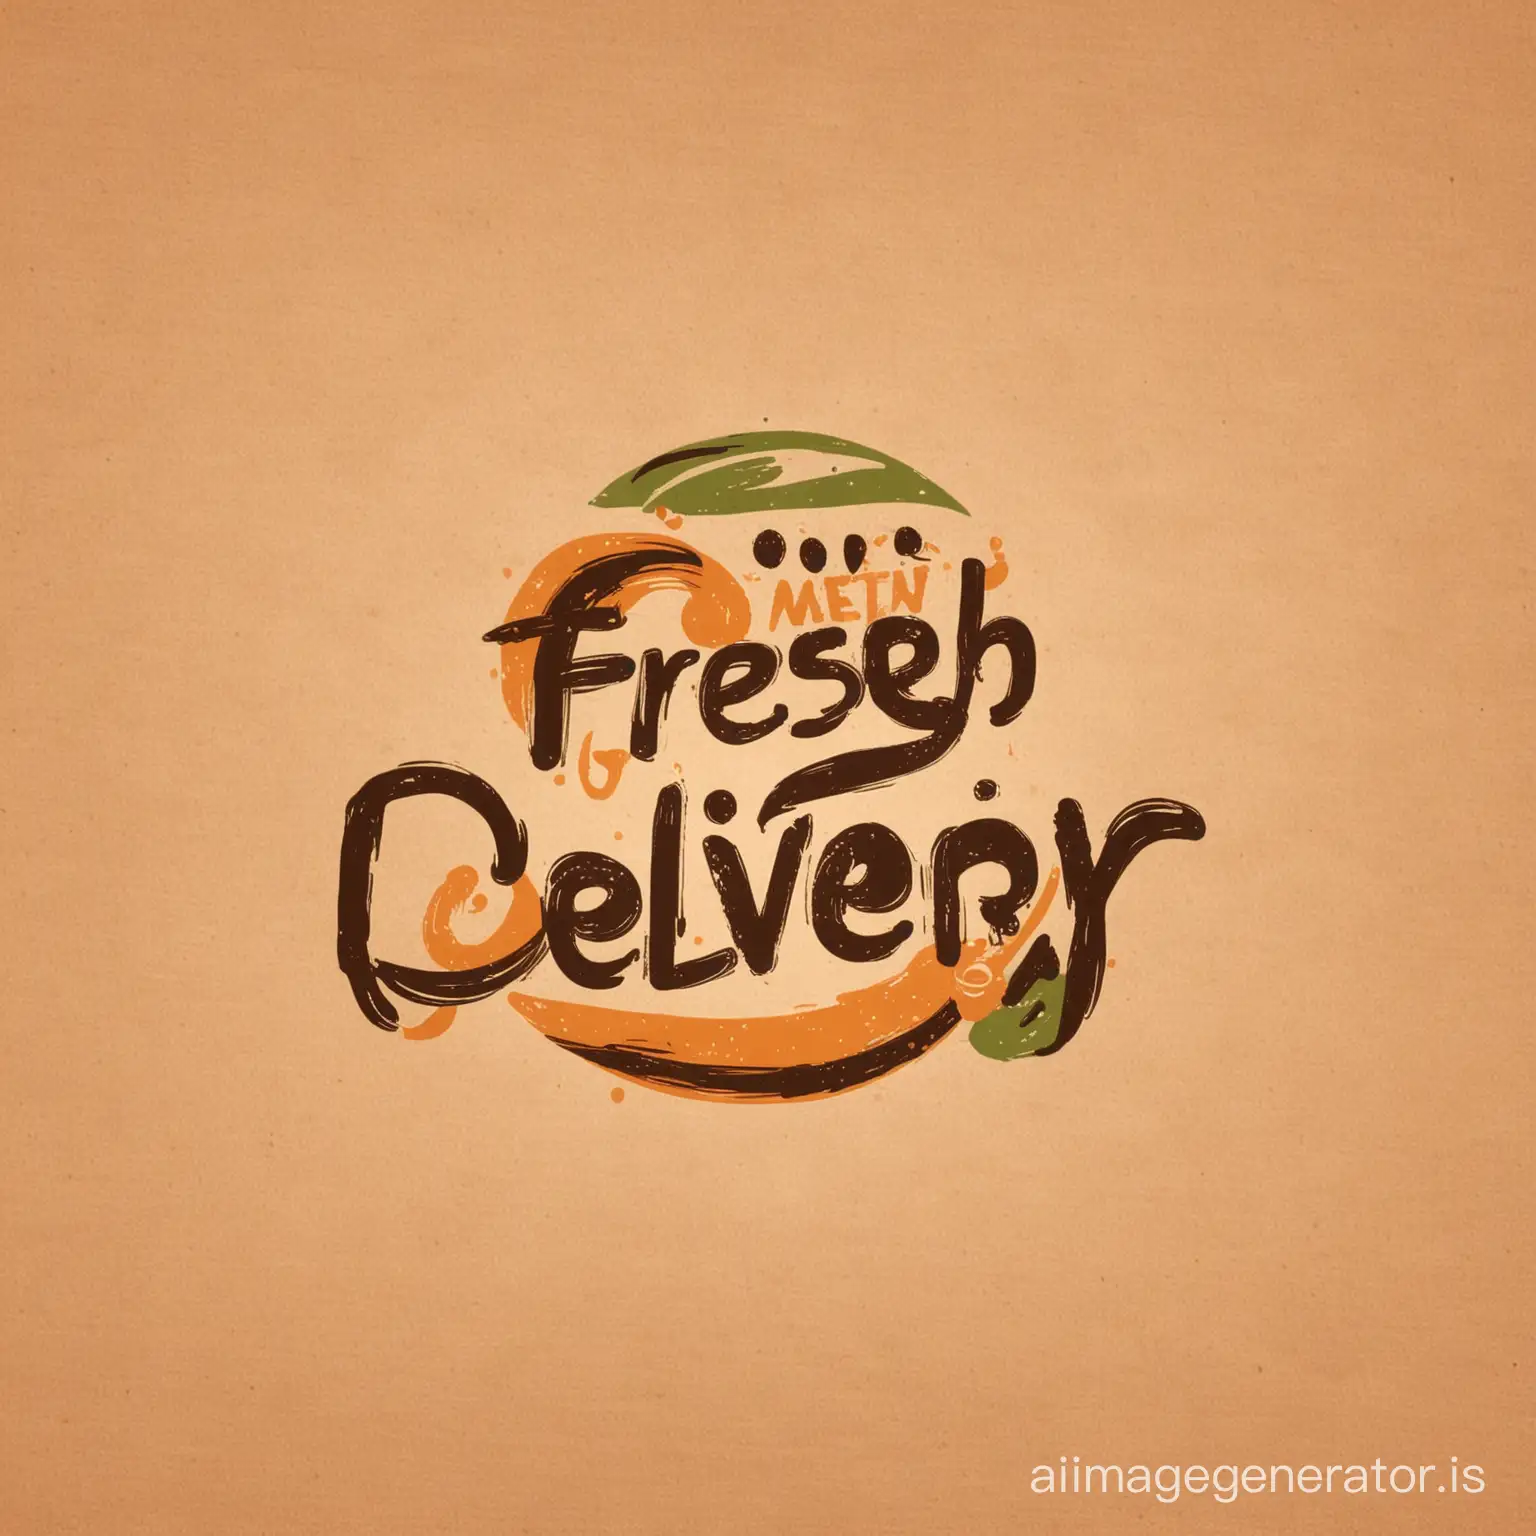 Generate a logo of my food delivery website and website name is fresher